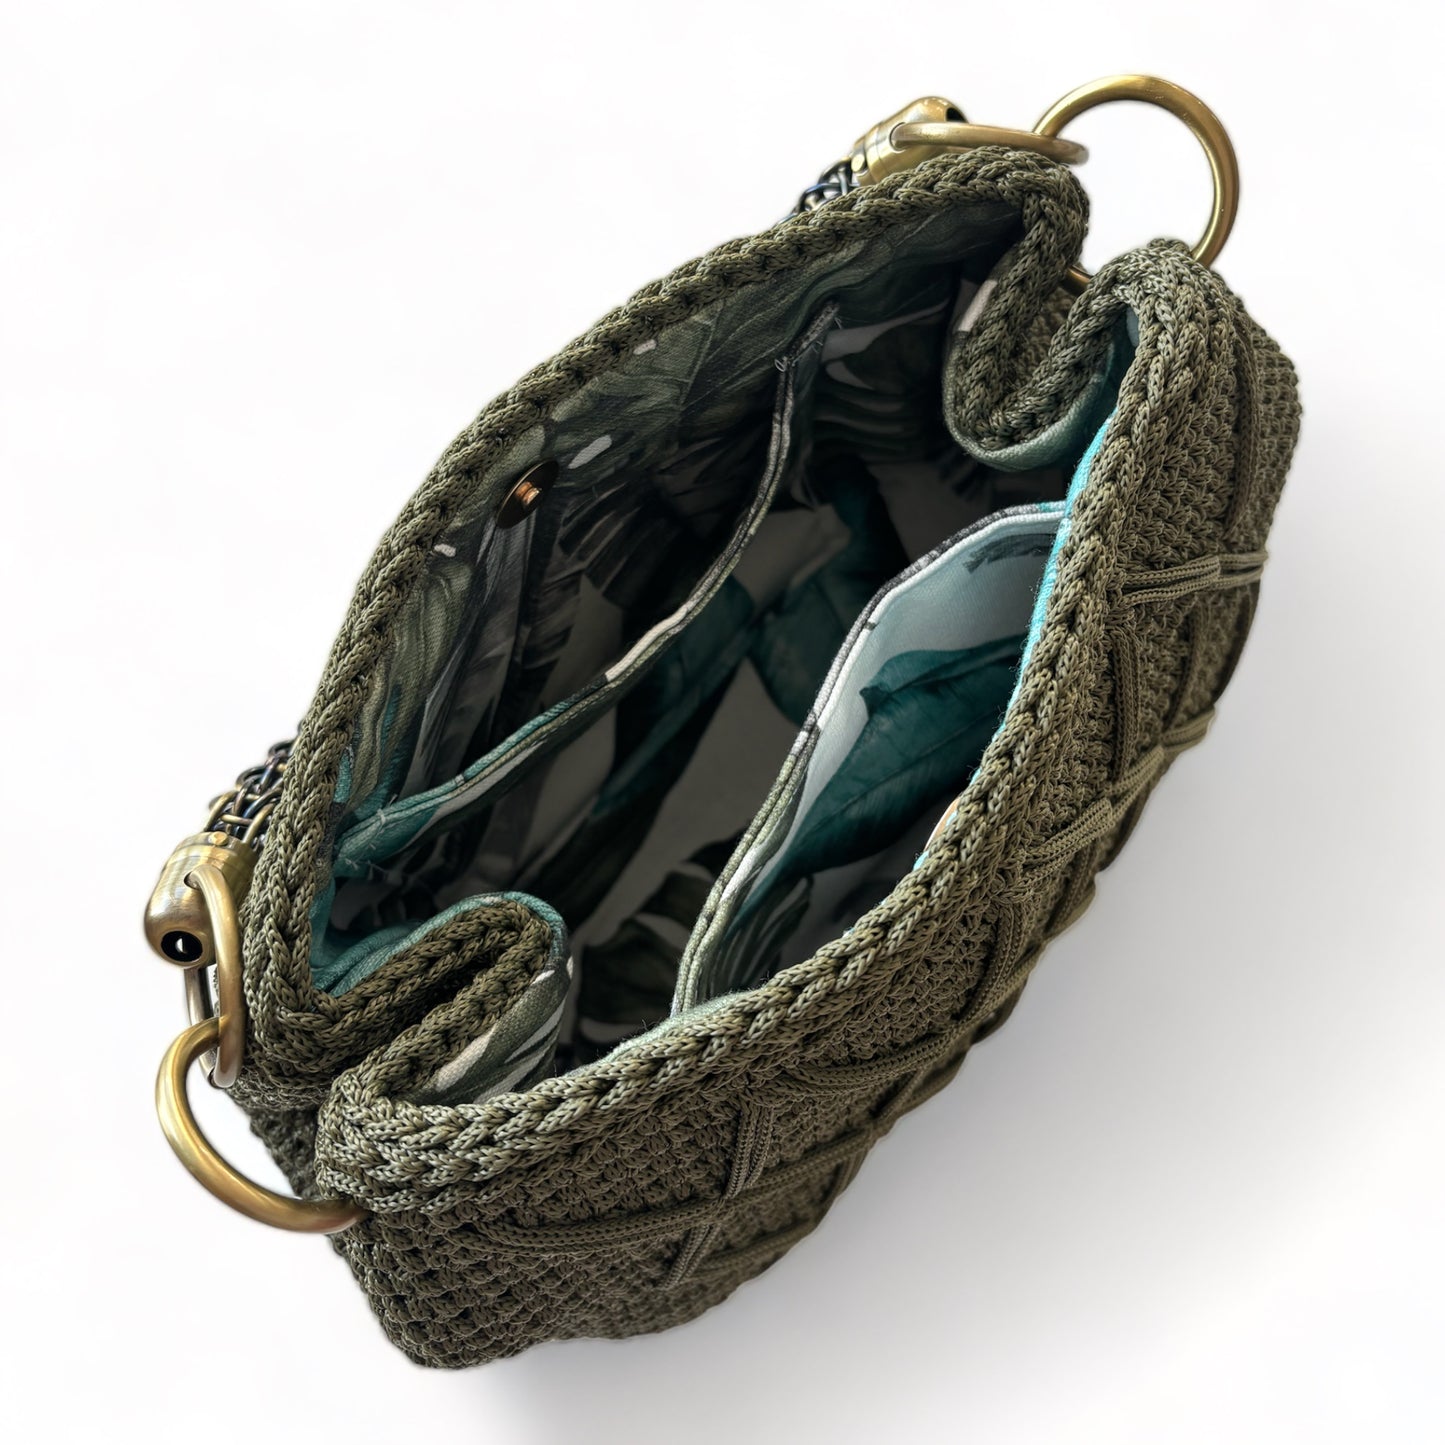 Green clutch with stunning metal chain